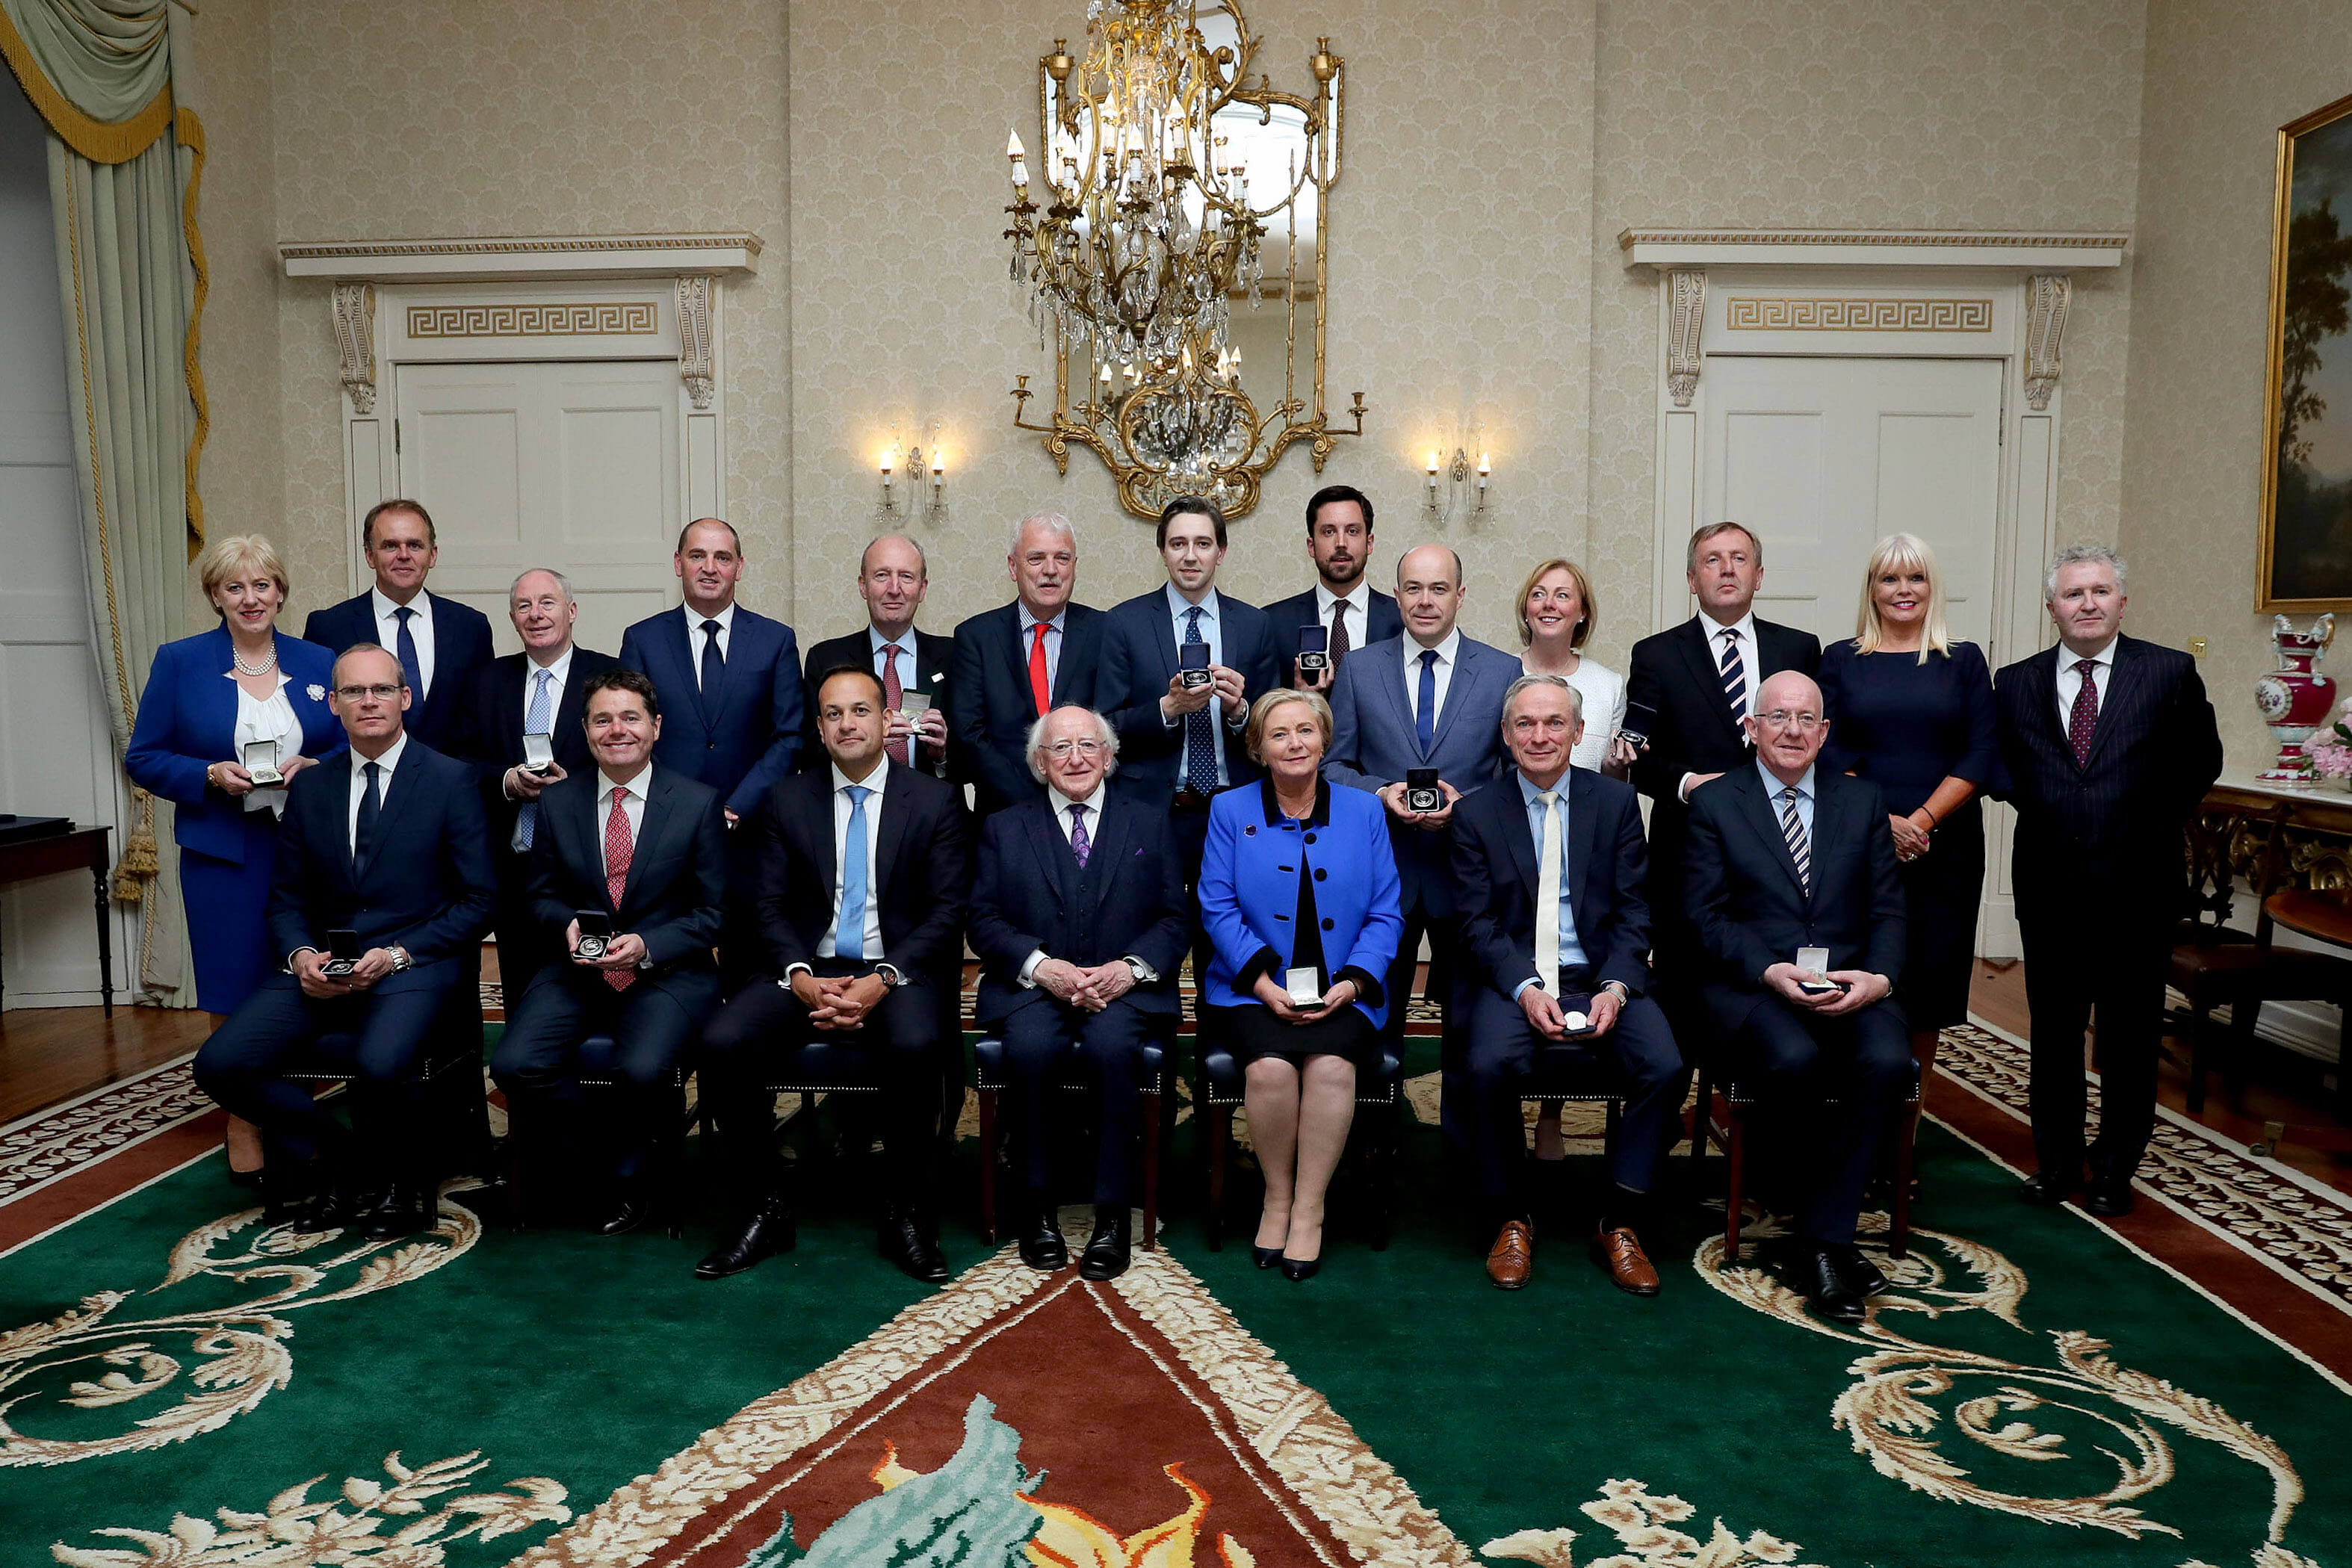 The President Constitutional Role President of Ireland